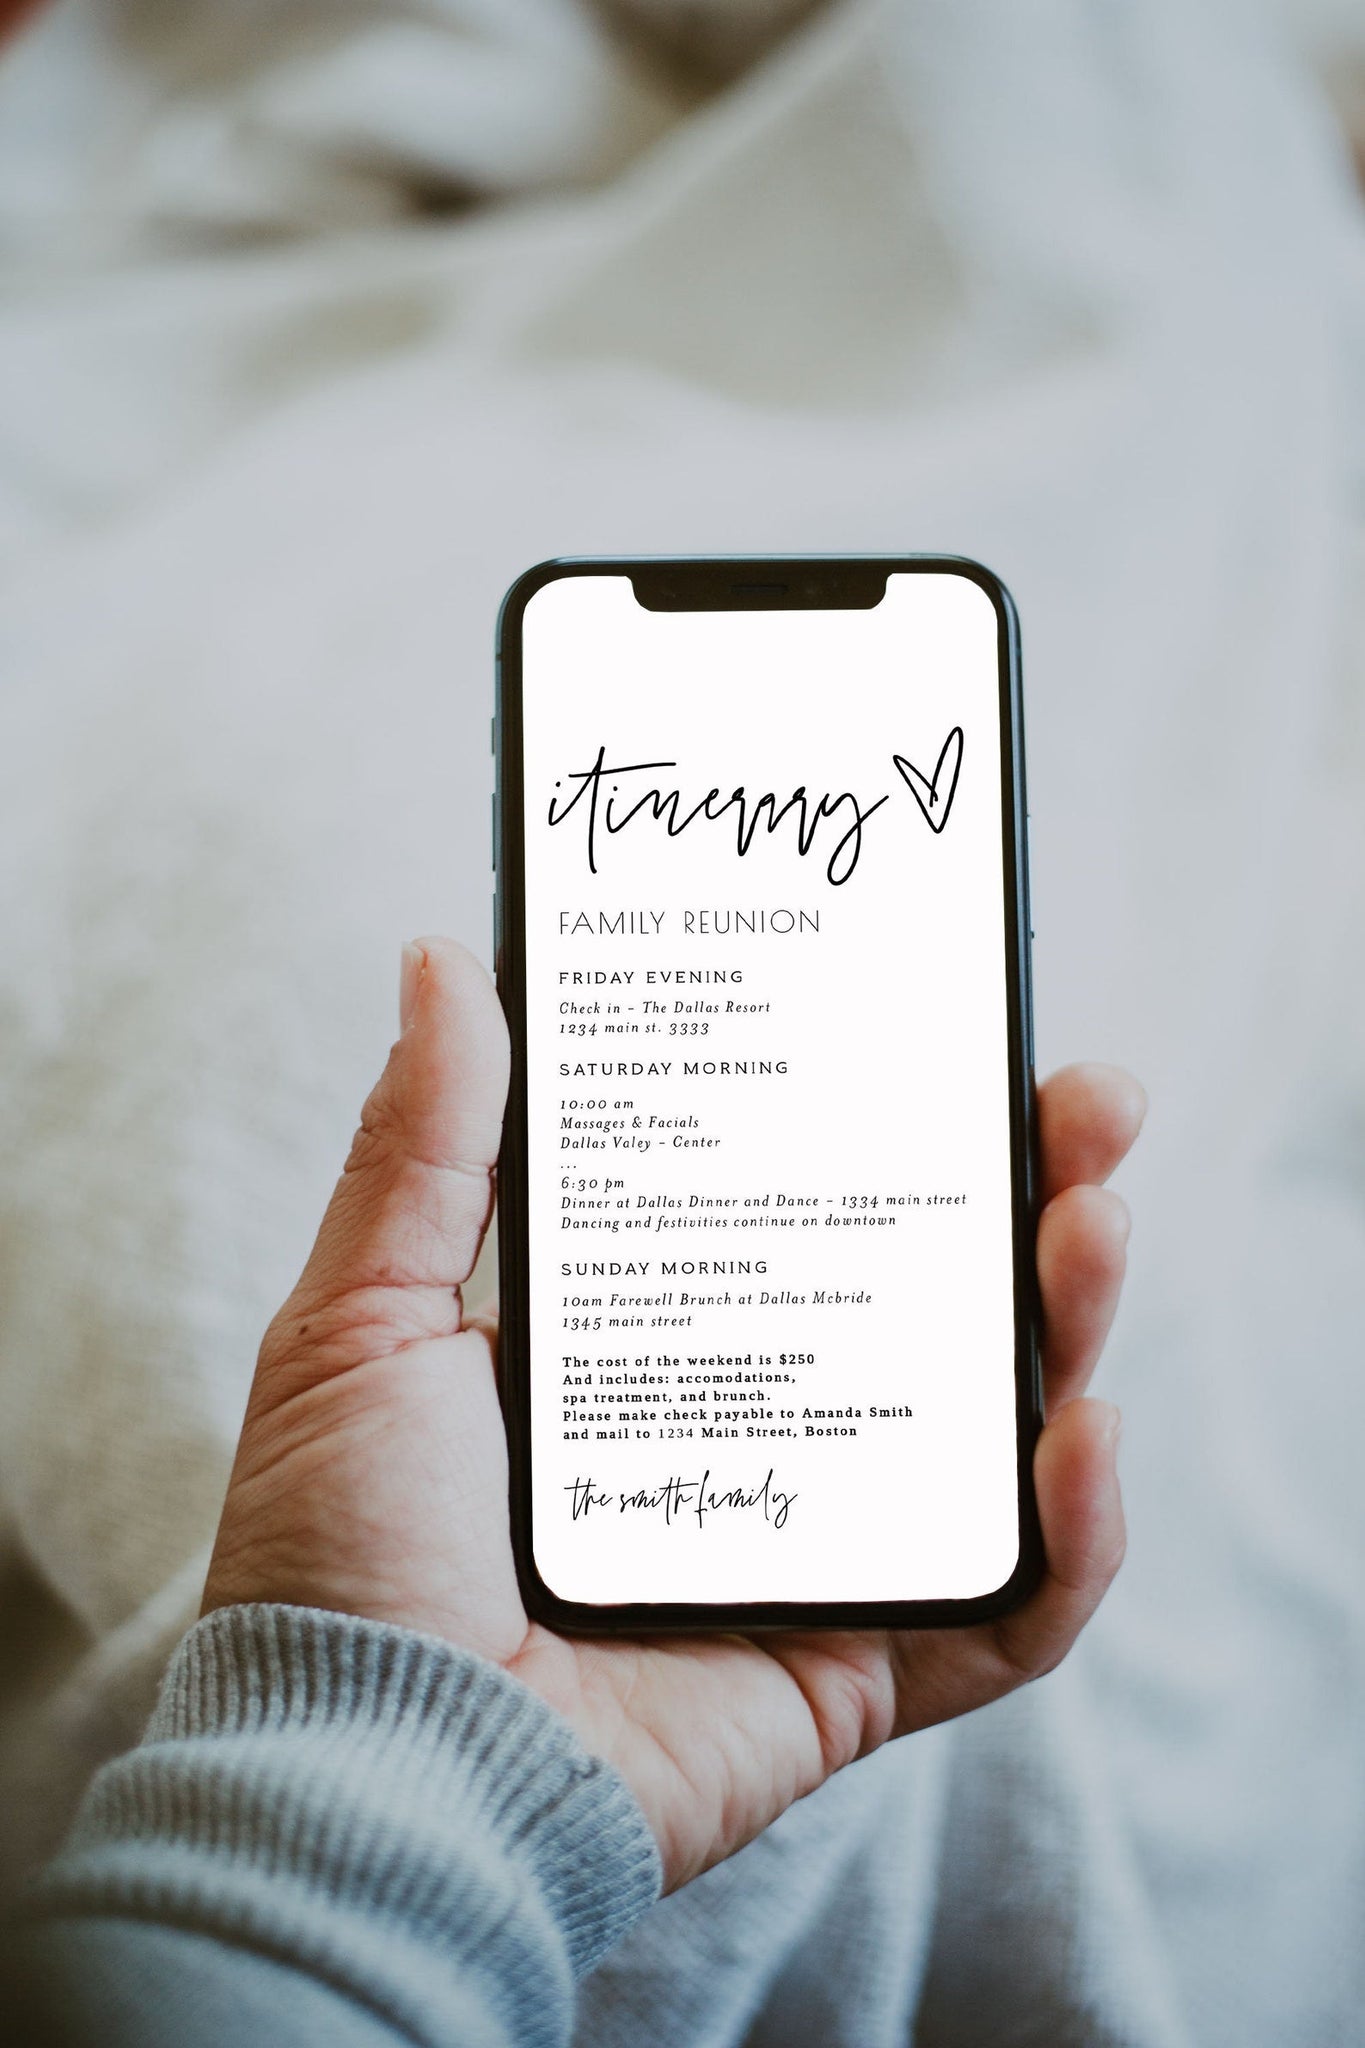 Ellia | Itinerary Electronic Template, Bachelorette, Wedding, Family Reunion, Electronic Schedule, Email Itinerary, Editable Text